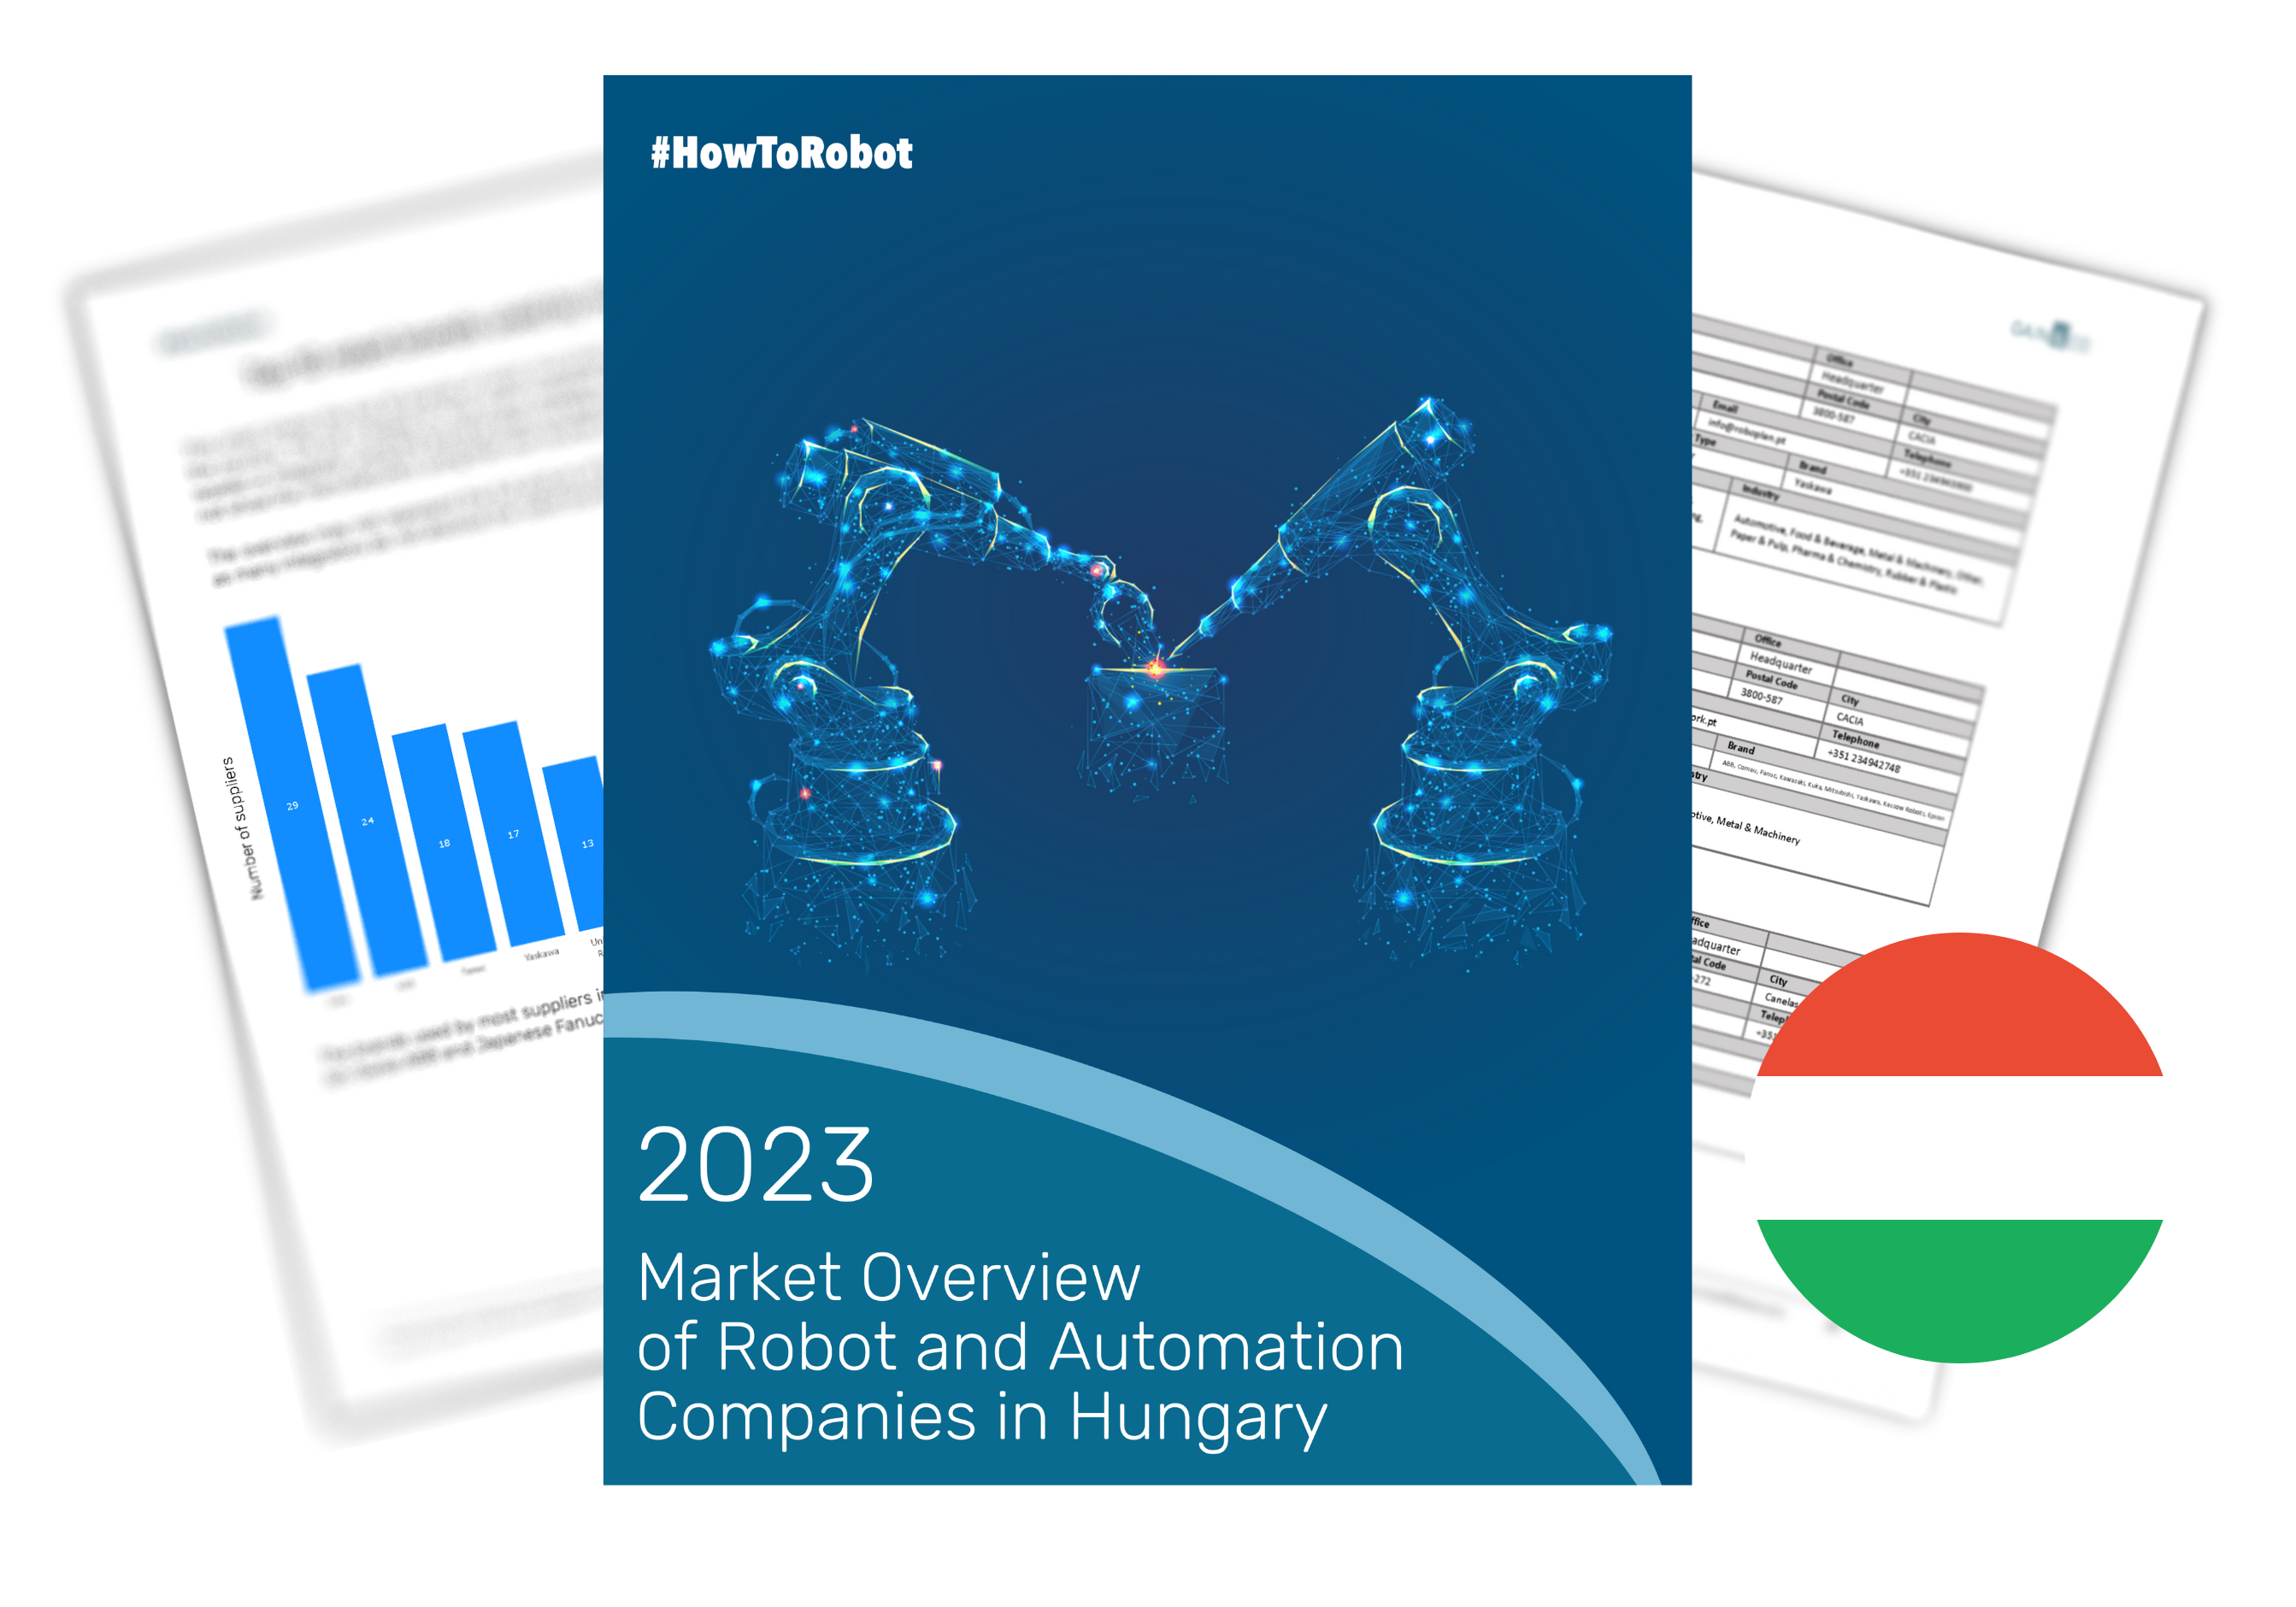 Market Overview of Robot and Automation Companies in Hungary